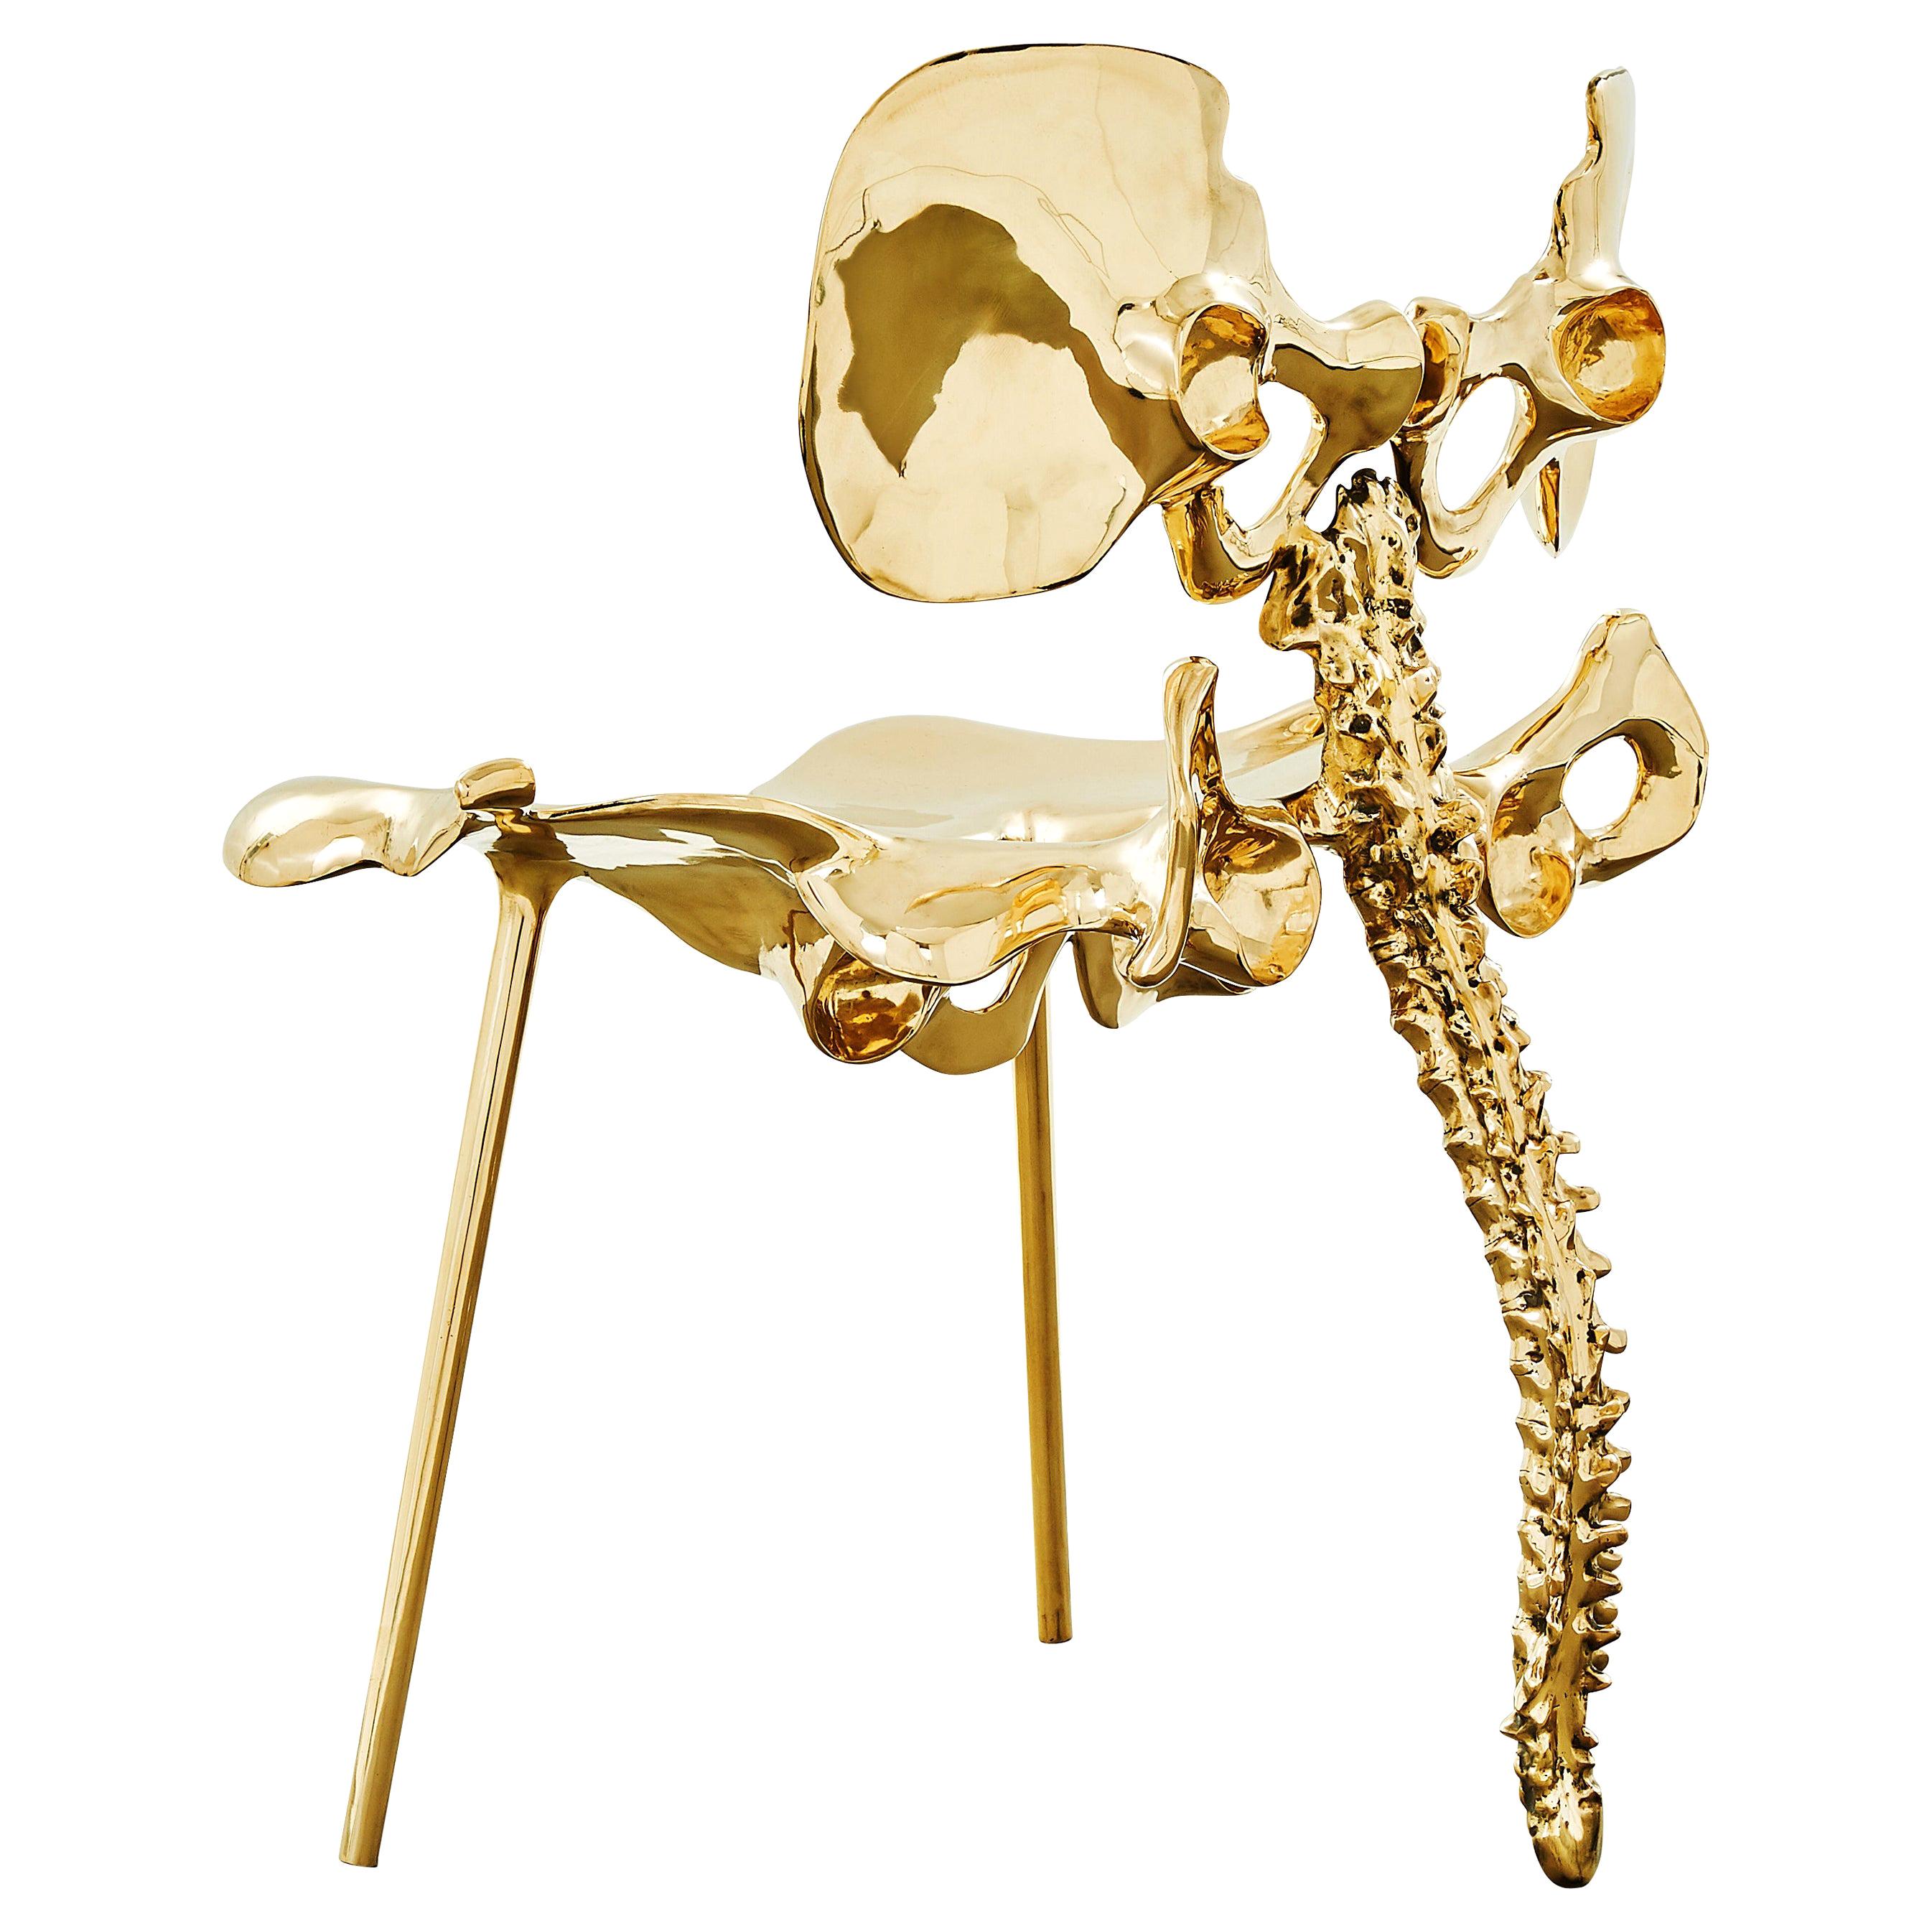 33 Step Chair Large Polished Brass Bone Chair by Zhipeng Tan For Sale